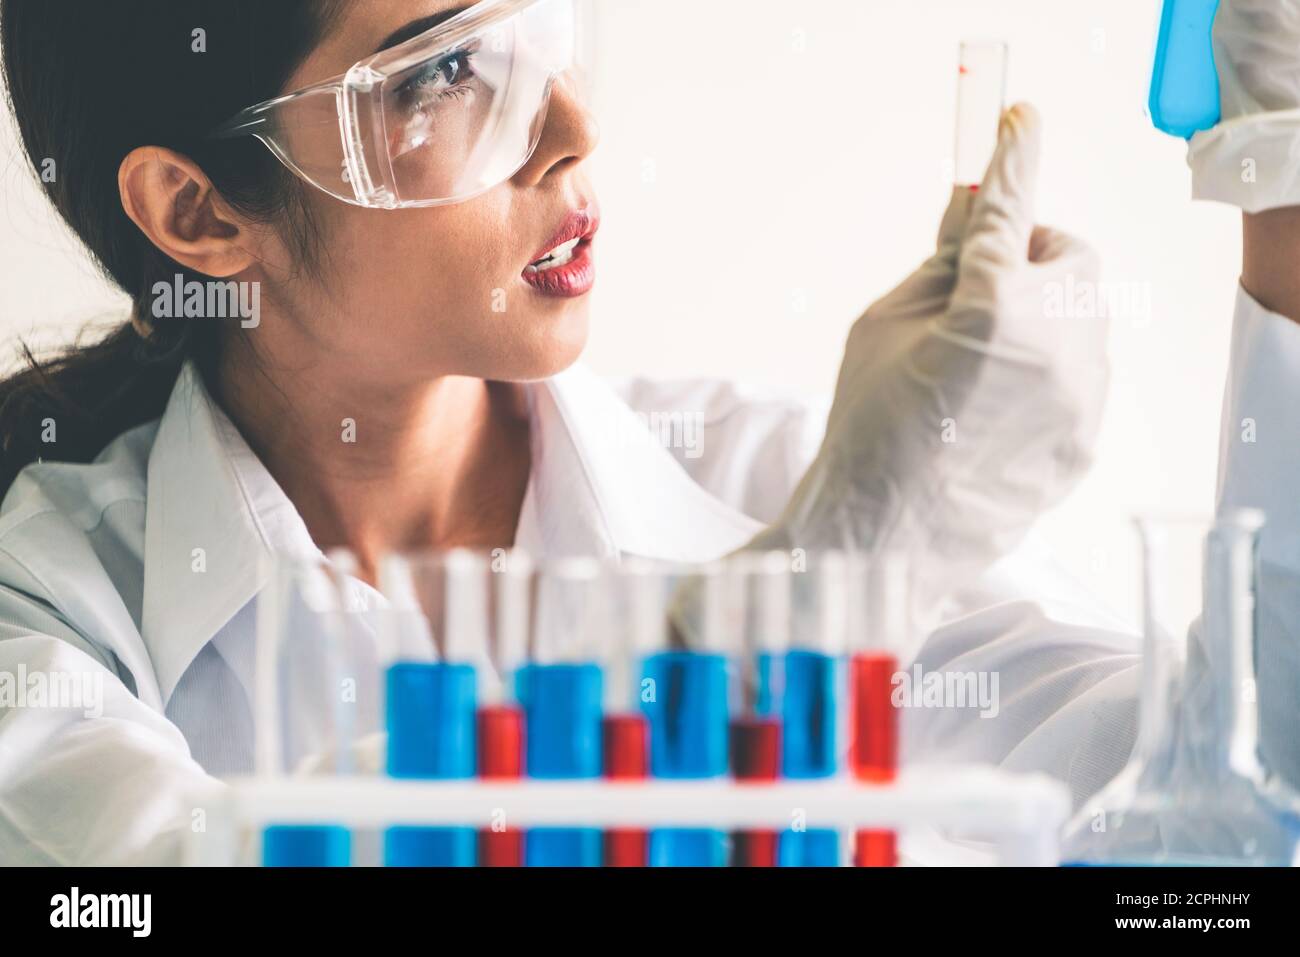 Woman scientist working in laboratory and examining biochemistry sample in test tube. Science technology research and development study concept. Stock Photo